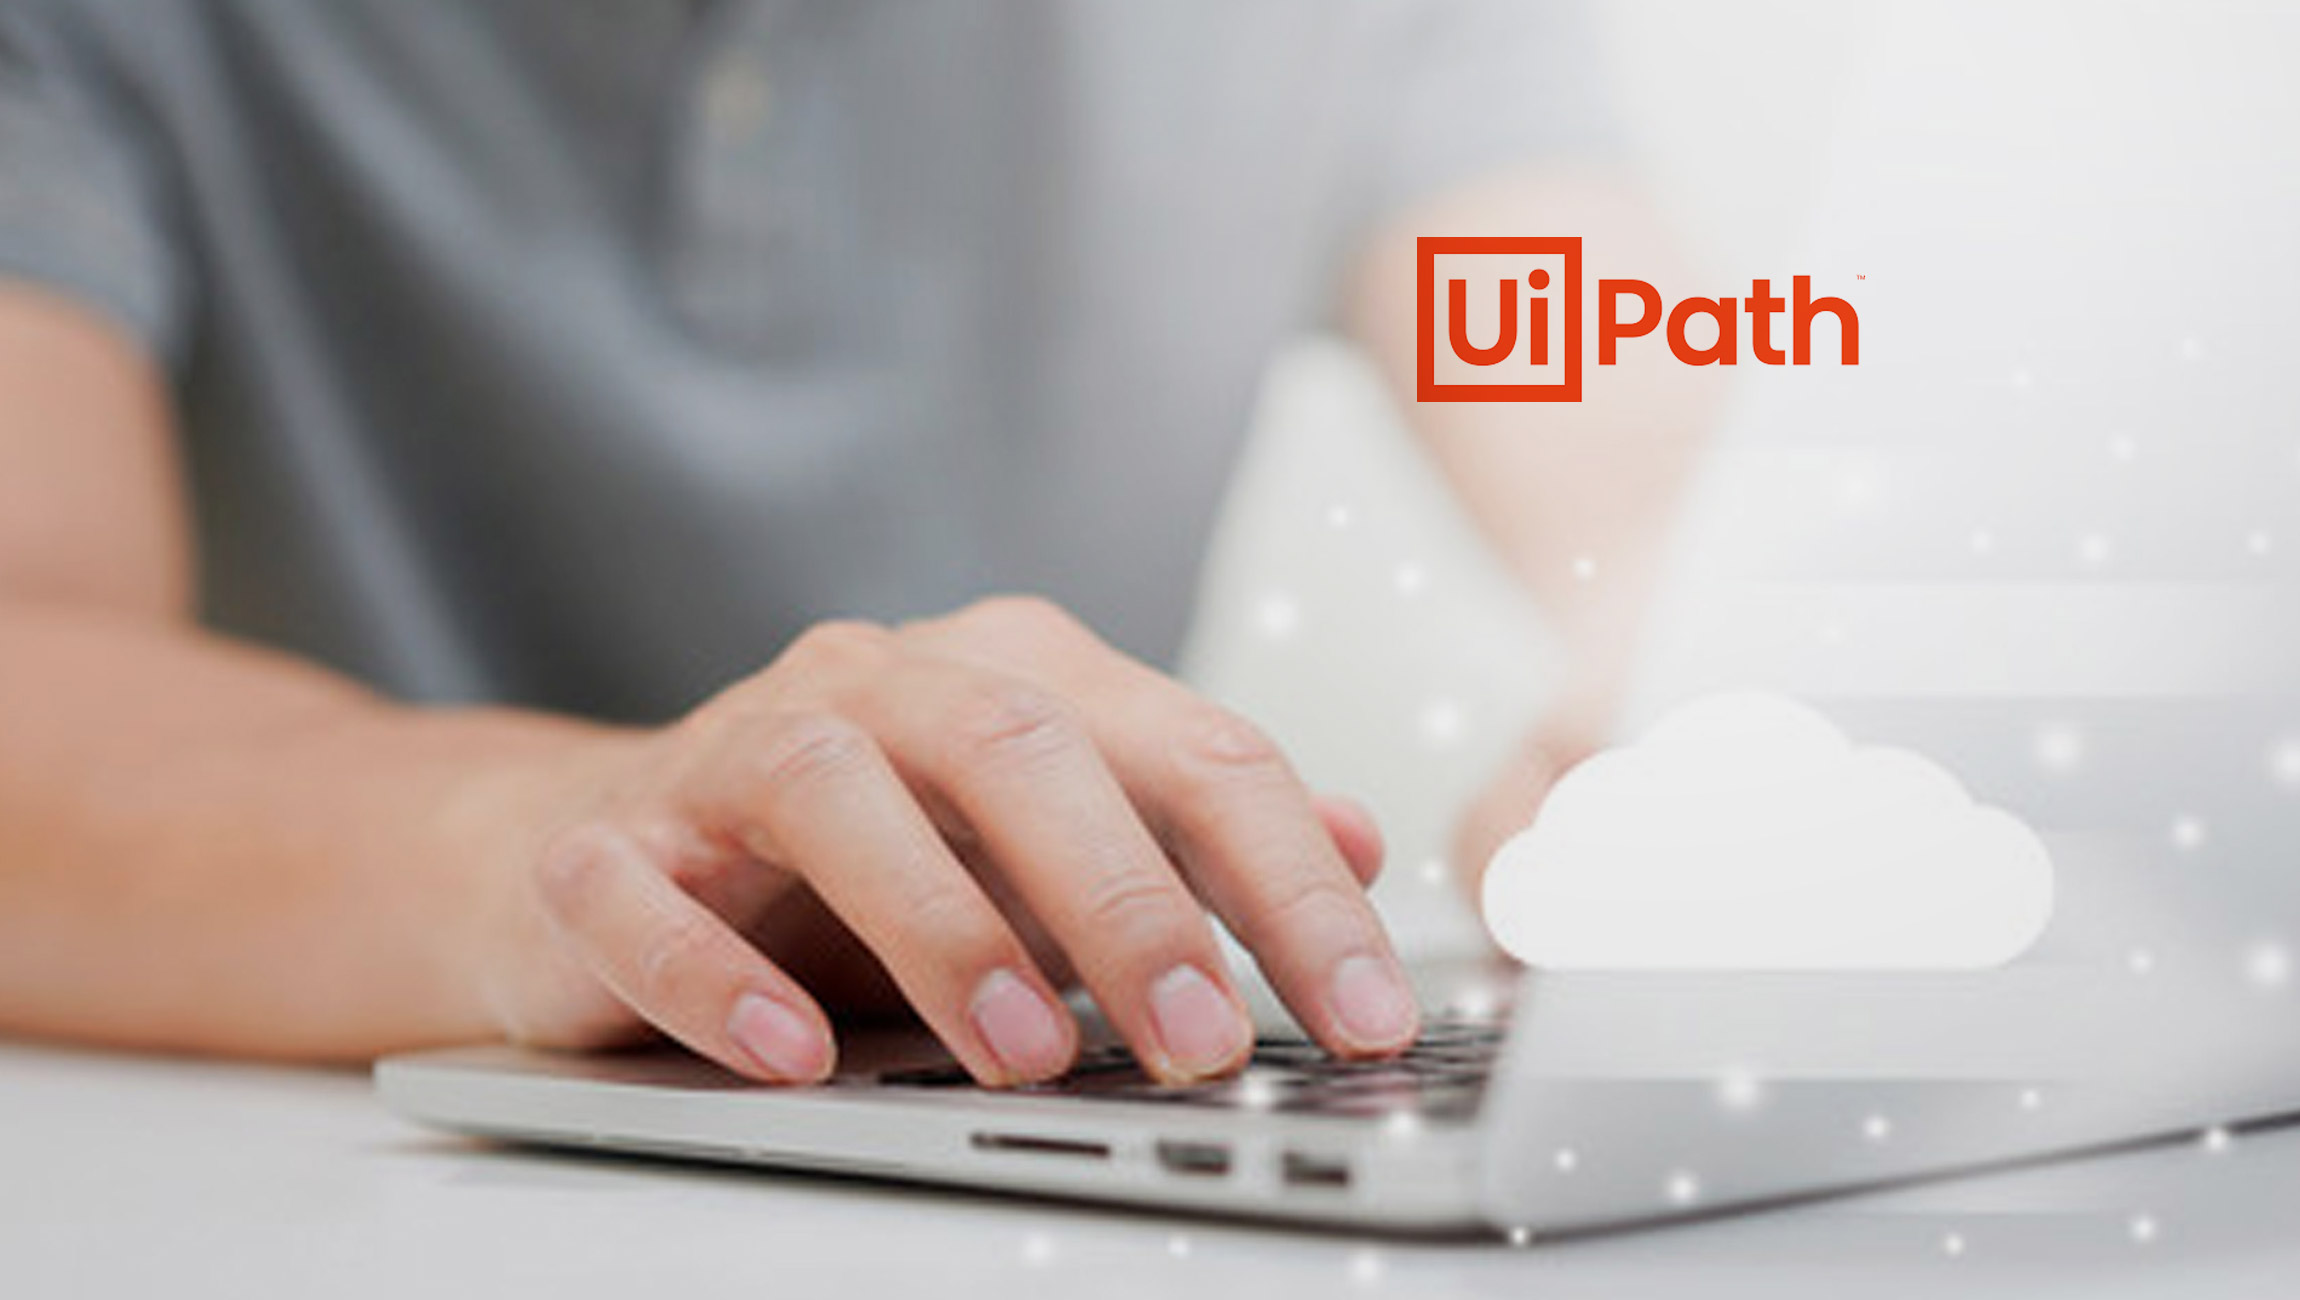 UiPath Announces New Connectors for Google AI and Google Workspace at Google Cloud Next 2023 